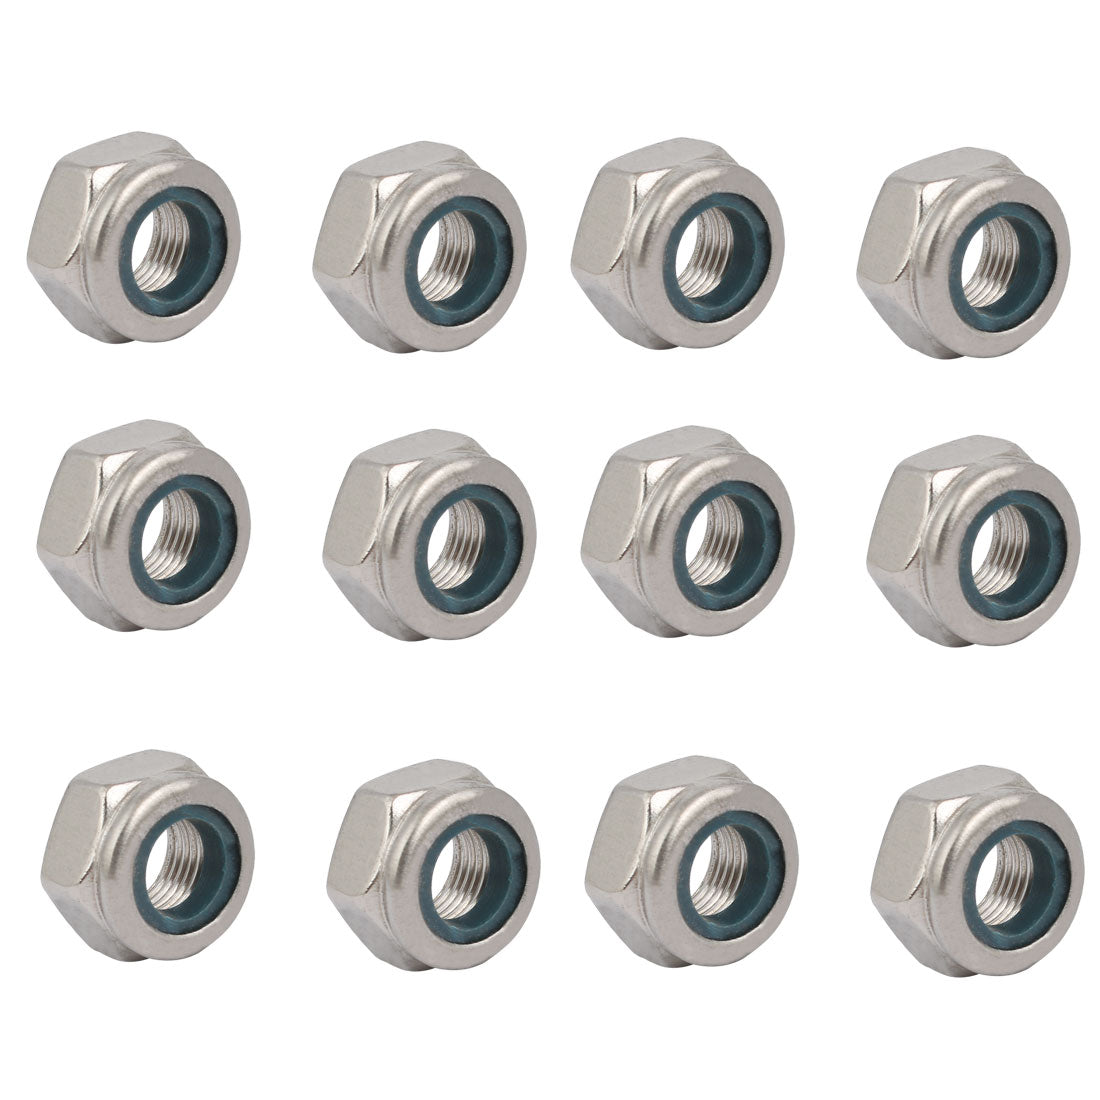 uxcell Uxcell 12pcs M10 x 1mm Pitch Metric Fine Thread 304 Stainless Steel Hex Lock Nuts